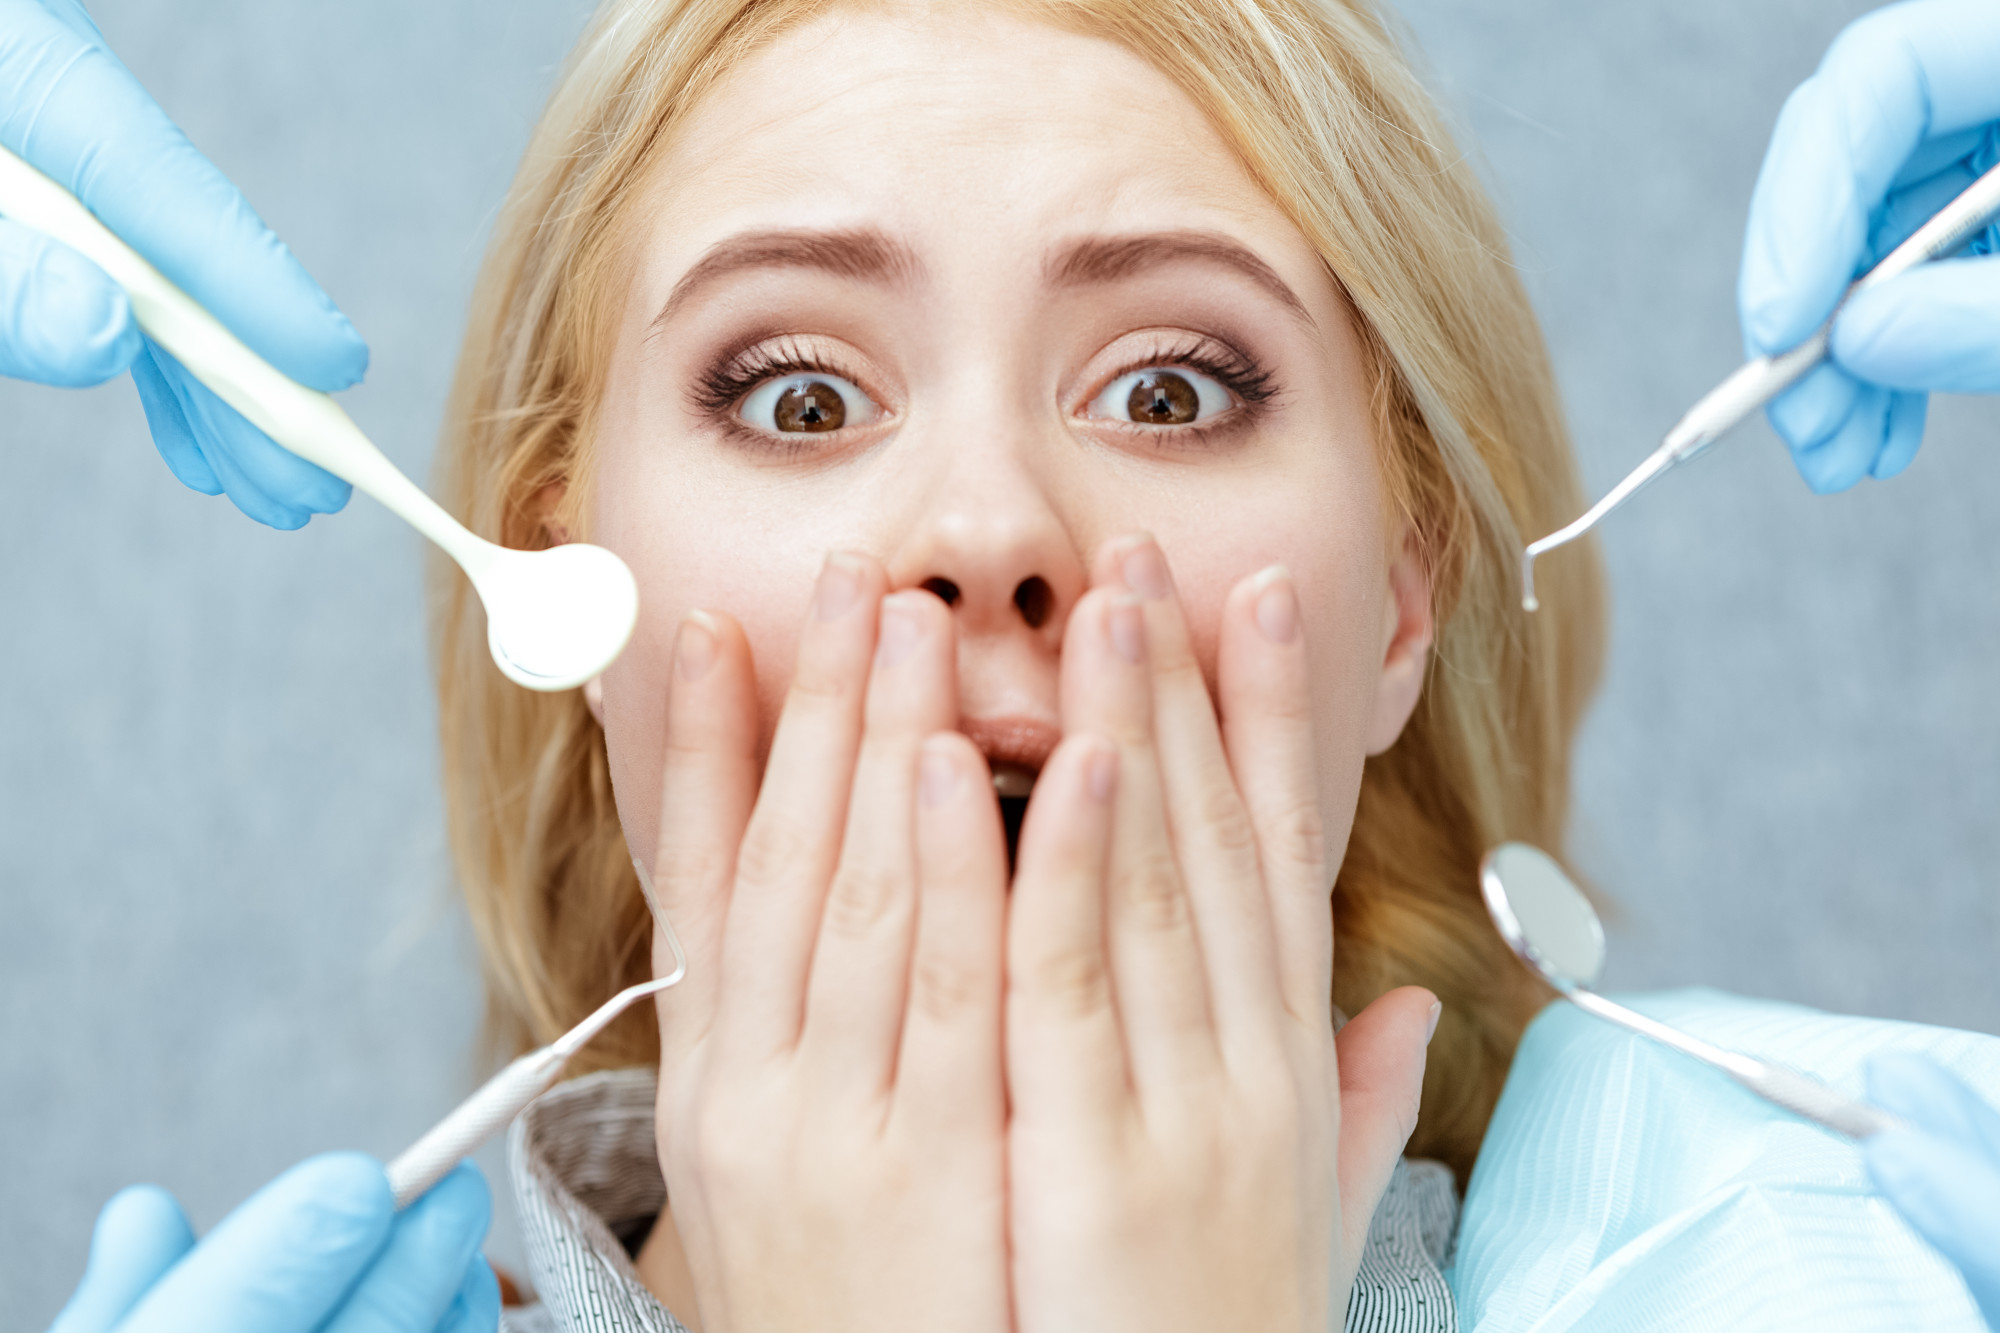 7 ways to overcome your fear of the dentist